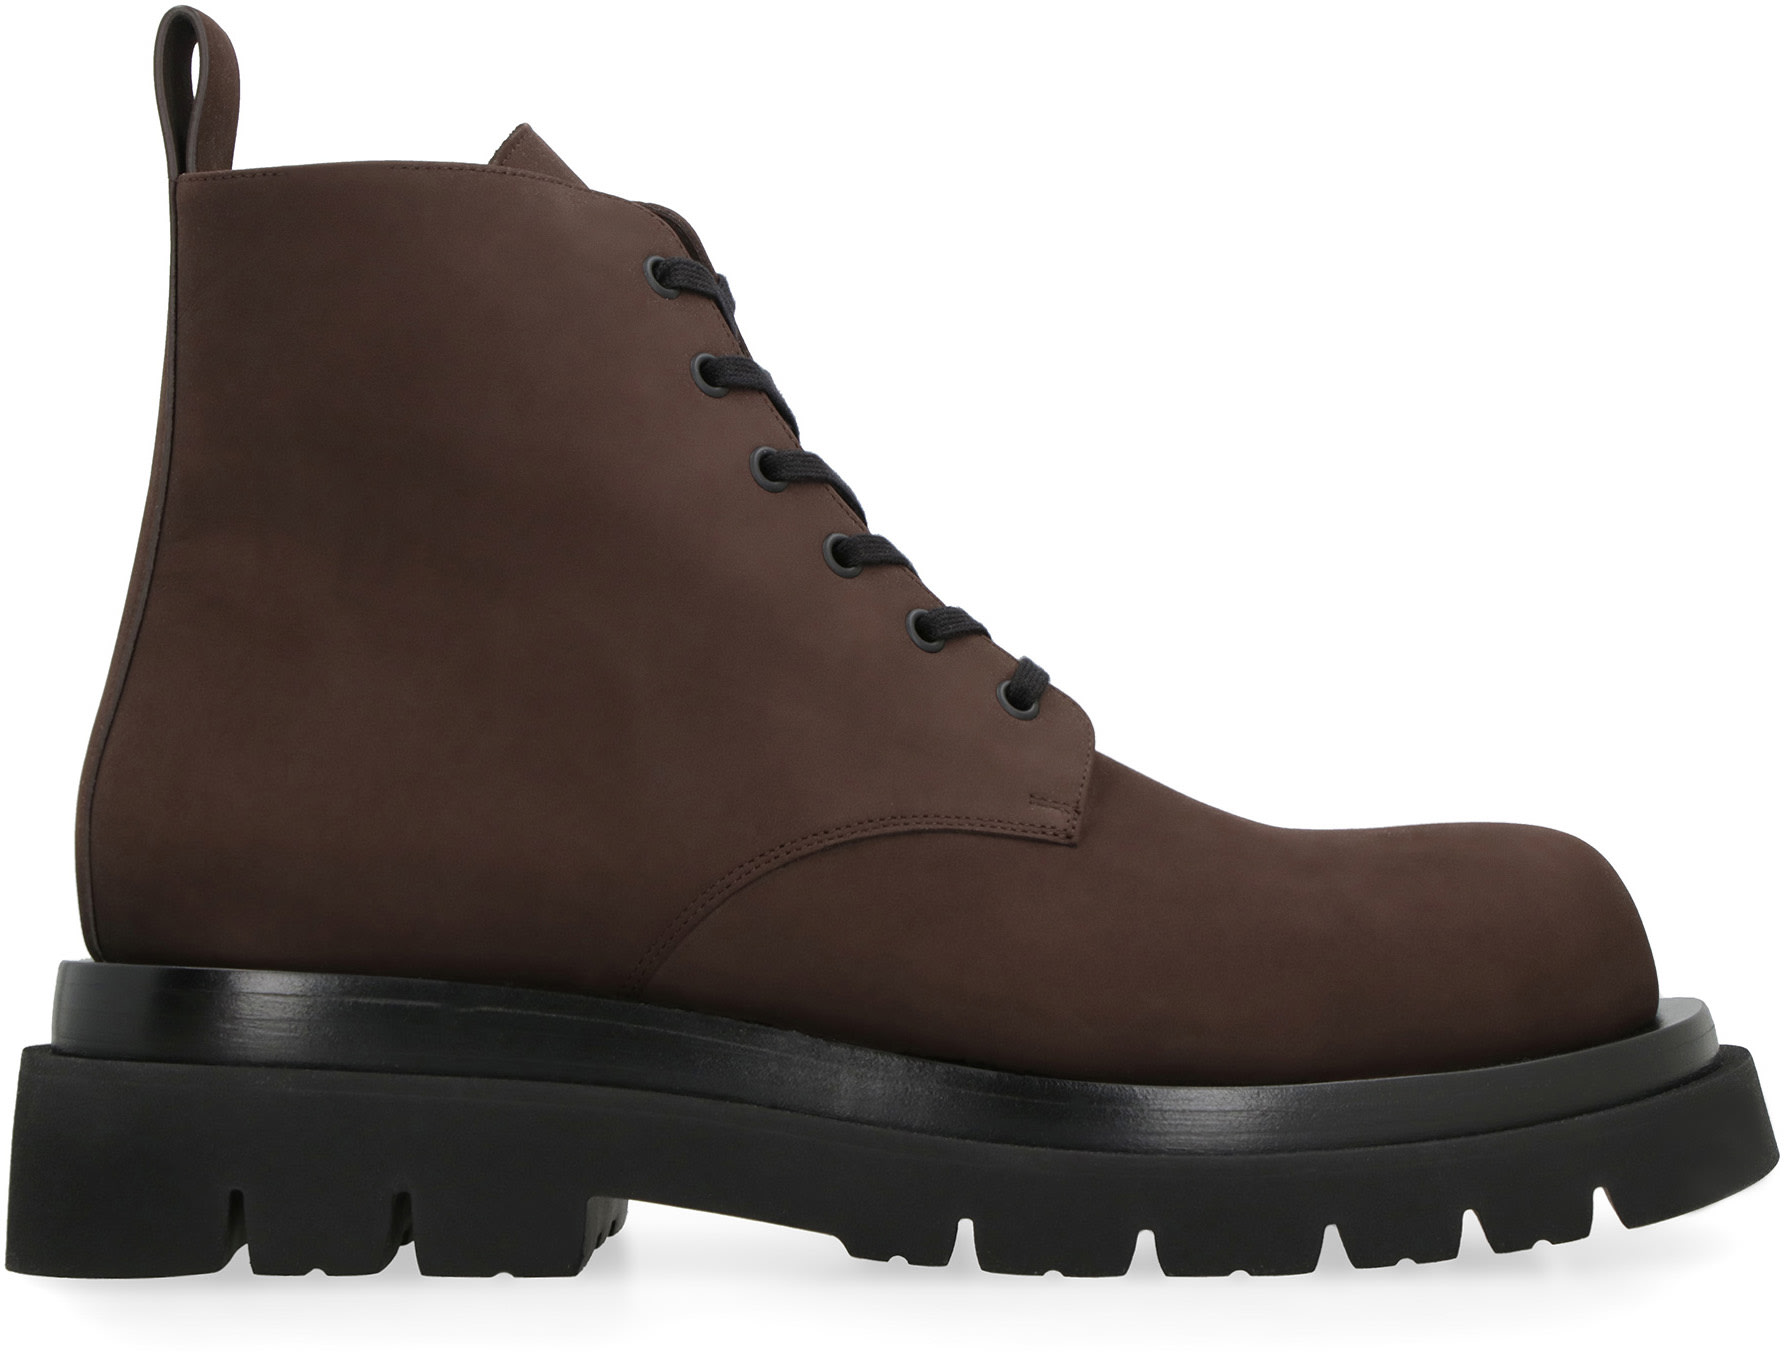 Lv hiking Boots – All Types Boutique By Tess